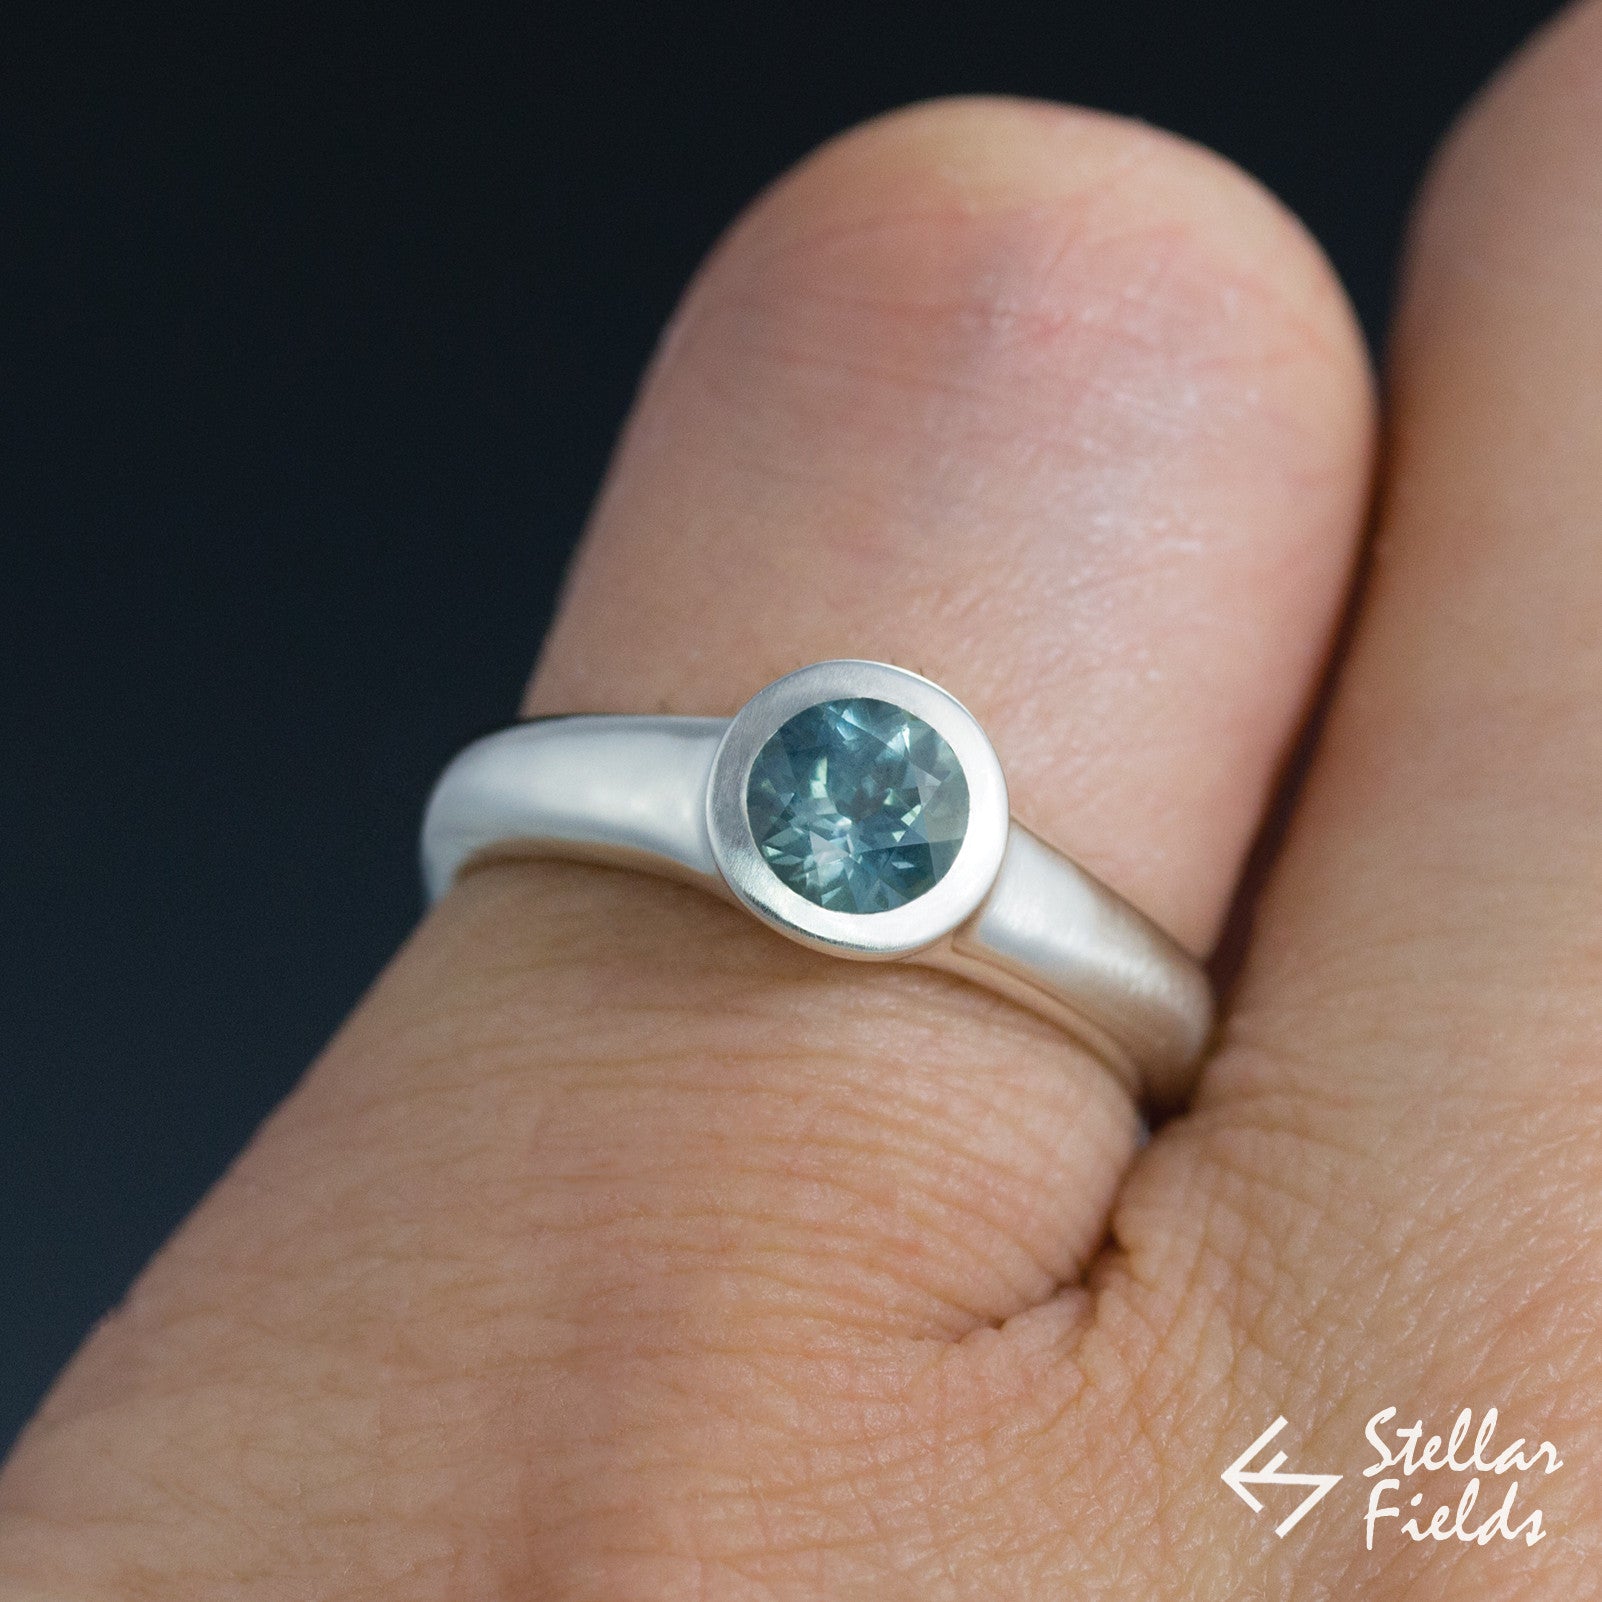 Ethical Green Montana Sapphire Round Bezel Engagement Ring in White Gold Platinum